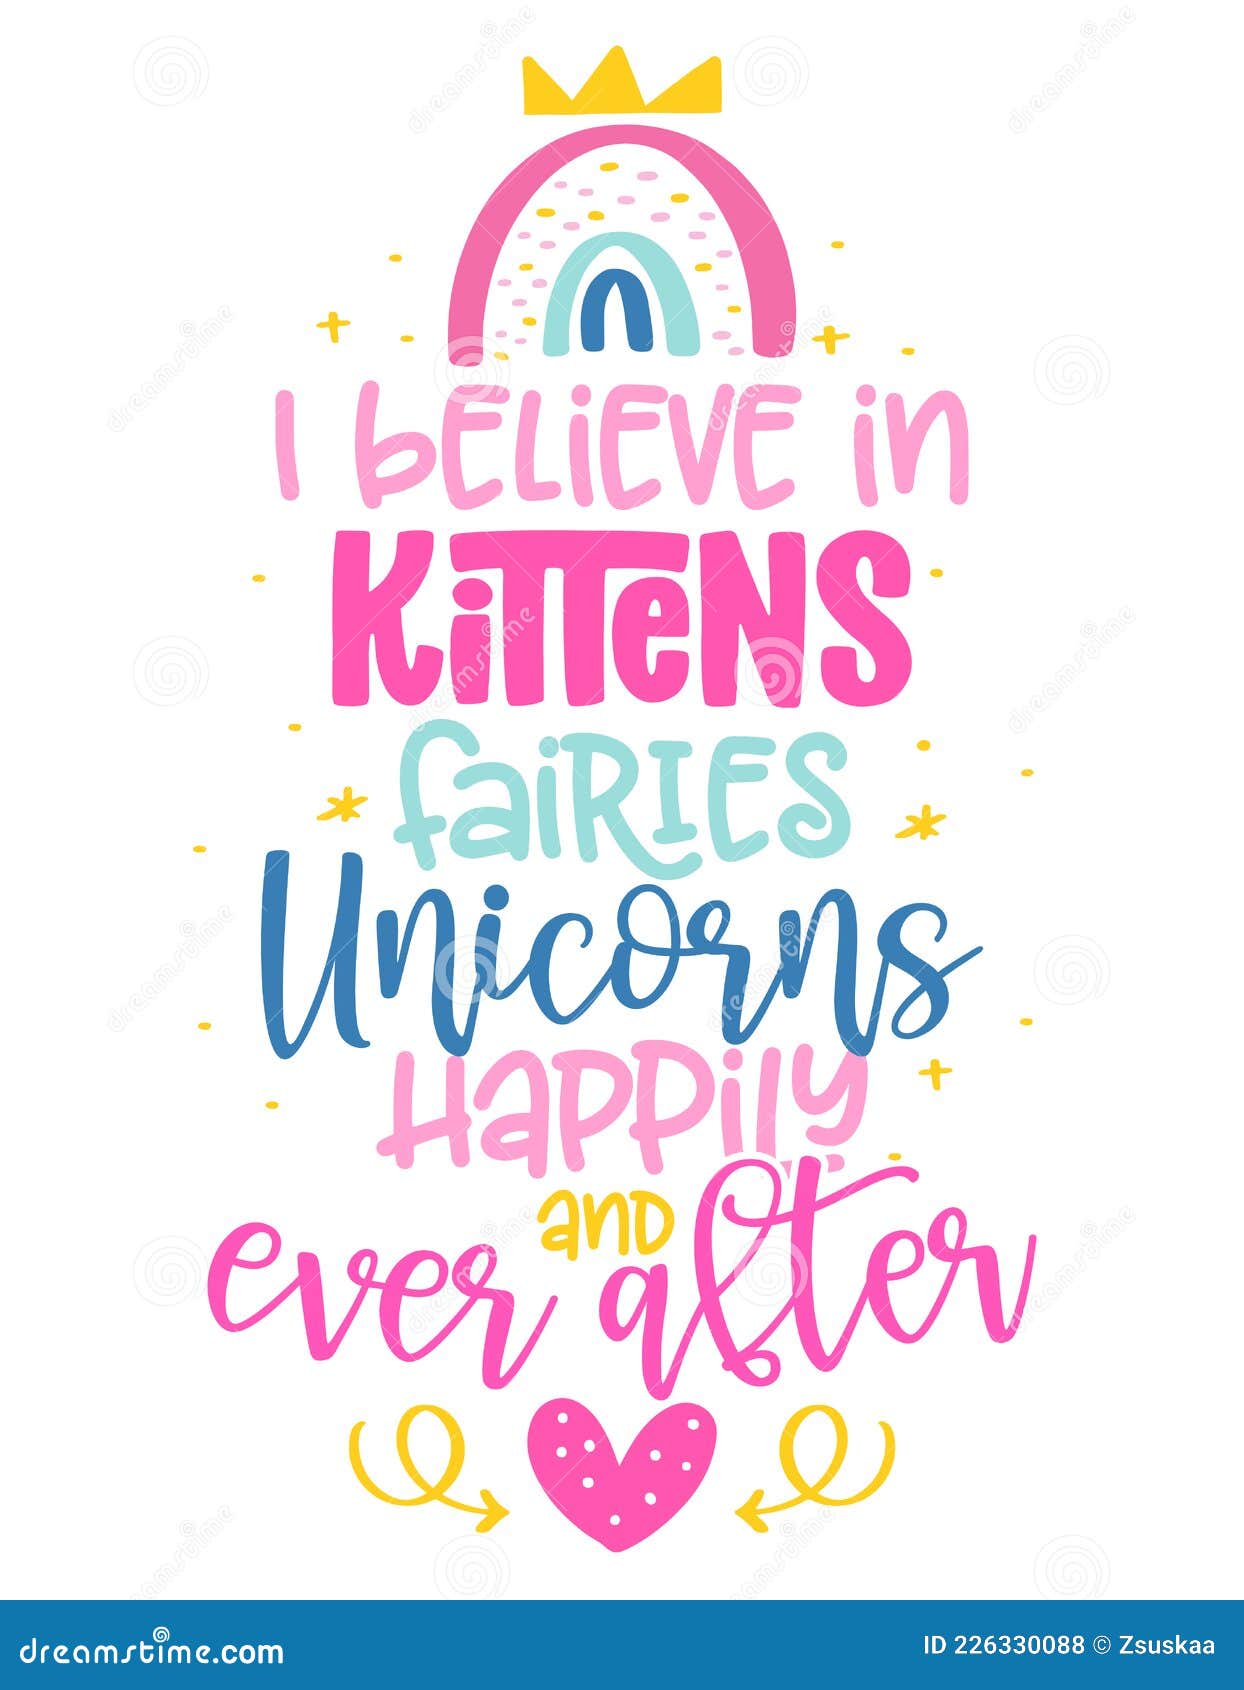 i believe in kittens, fairies, unicorns, happily ever and after